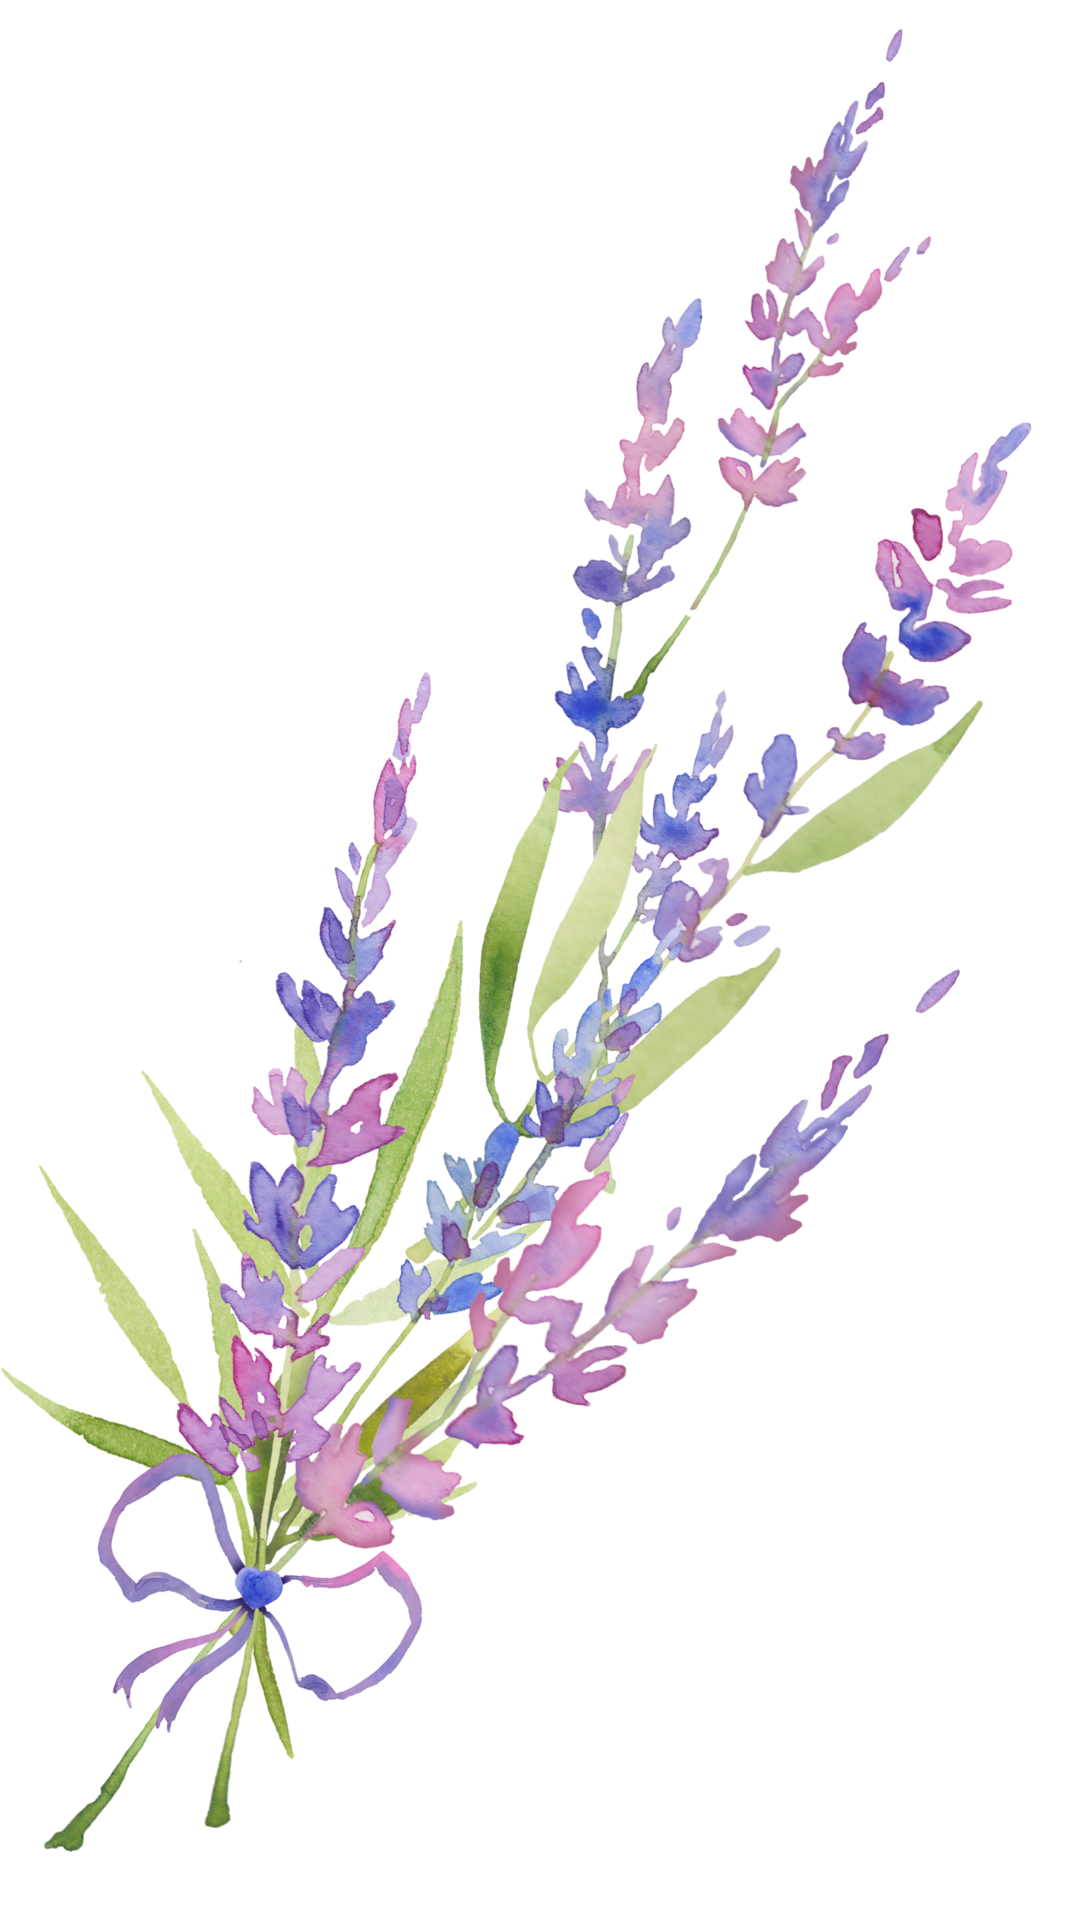 Lavender Flower PNG Free Images with Transparent Background - (290 Free  Downloads)